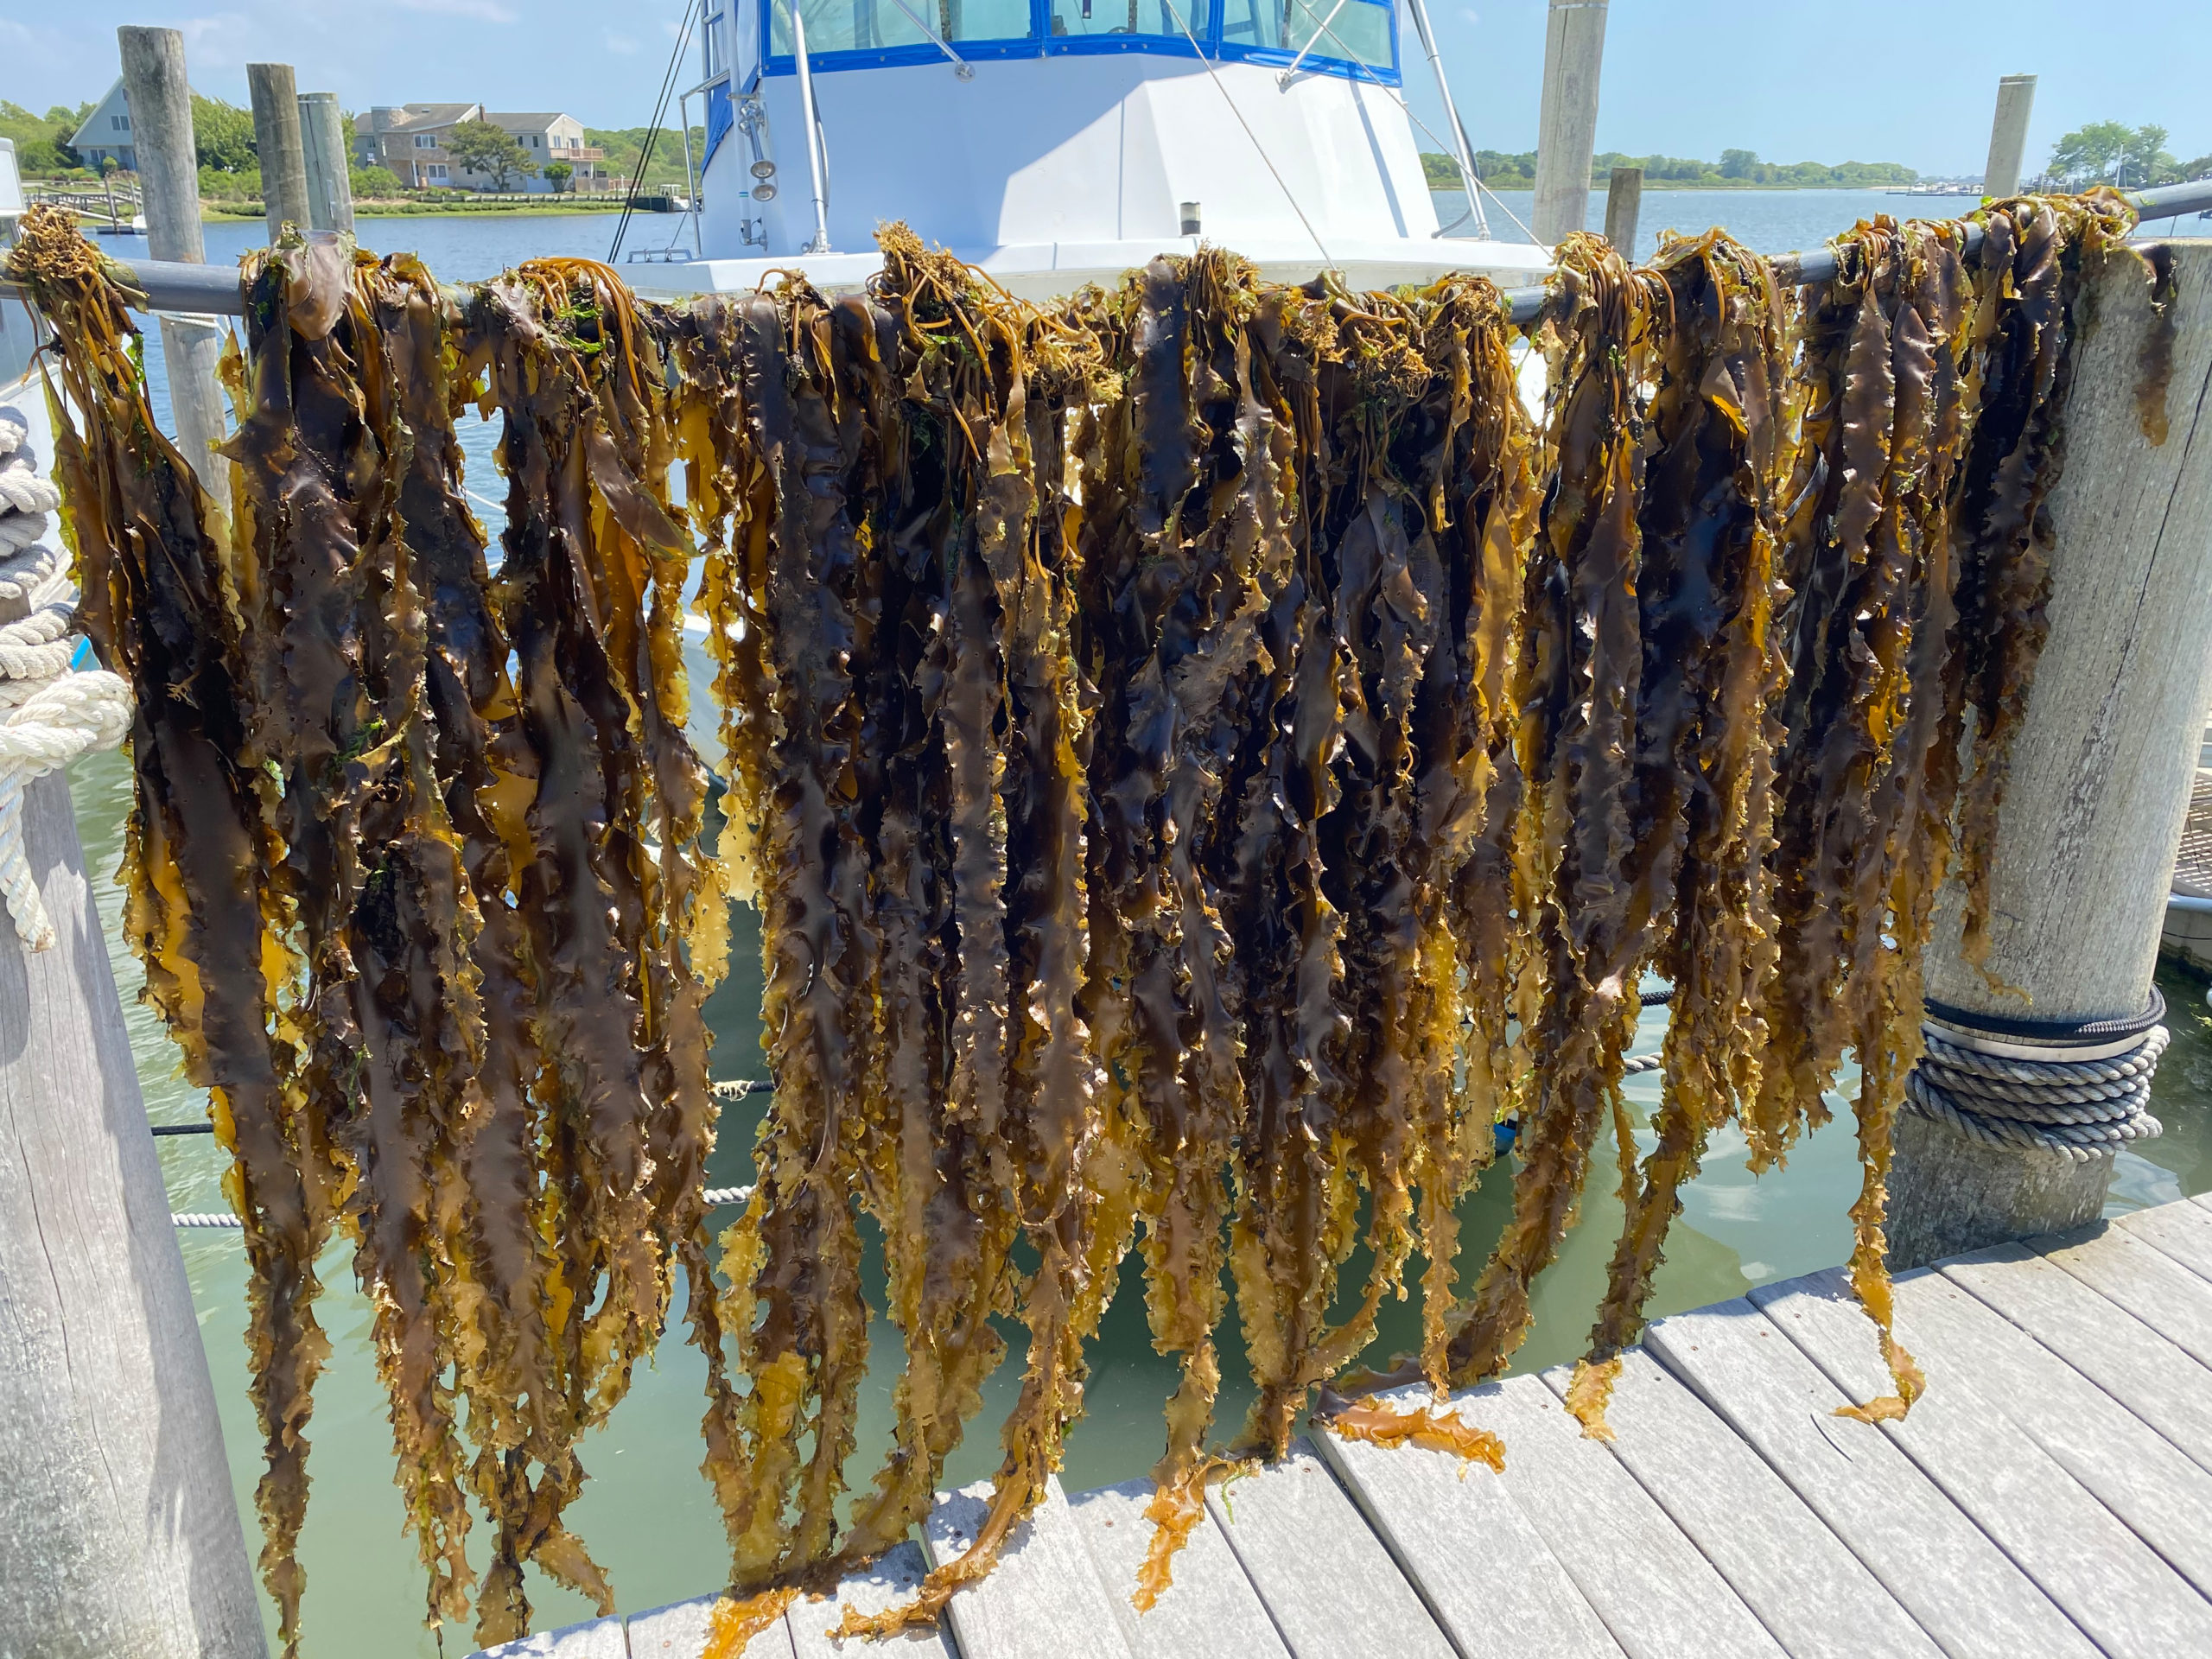 Sugar kelp, a brown rubbery plant that can grow underwater fronds 15 feet long, is proving in test cases, the researchers say, to be highly efficient at soaking up nitrogen and phosphorous from the water.   DANA SHAW